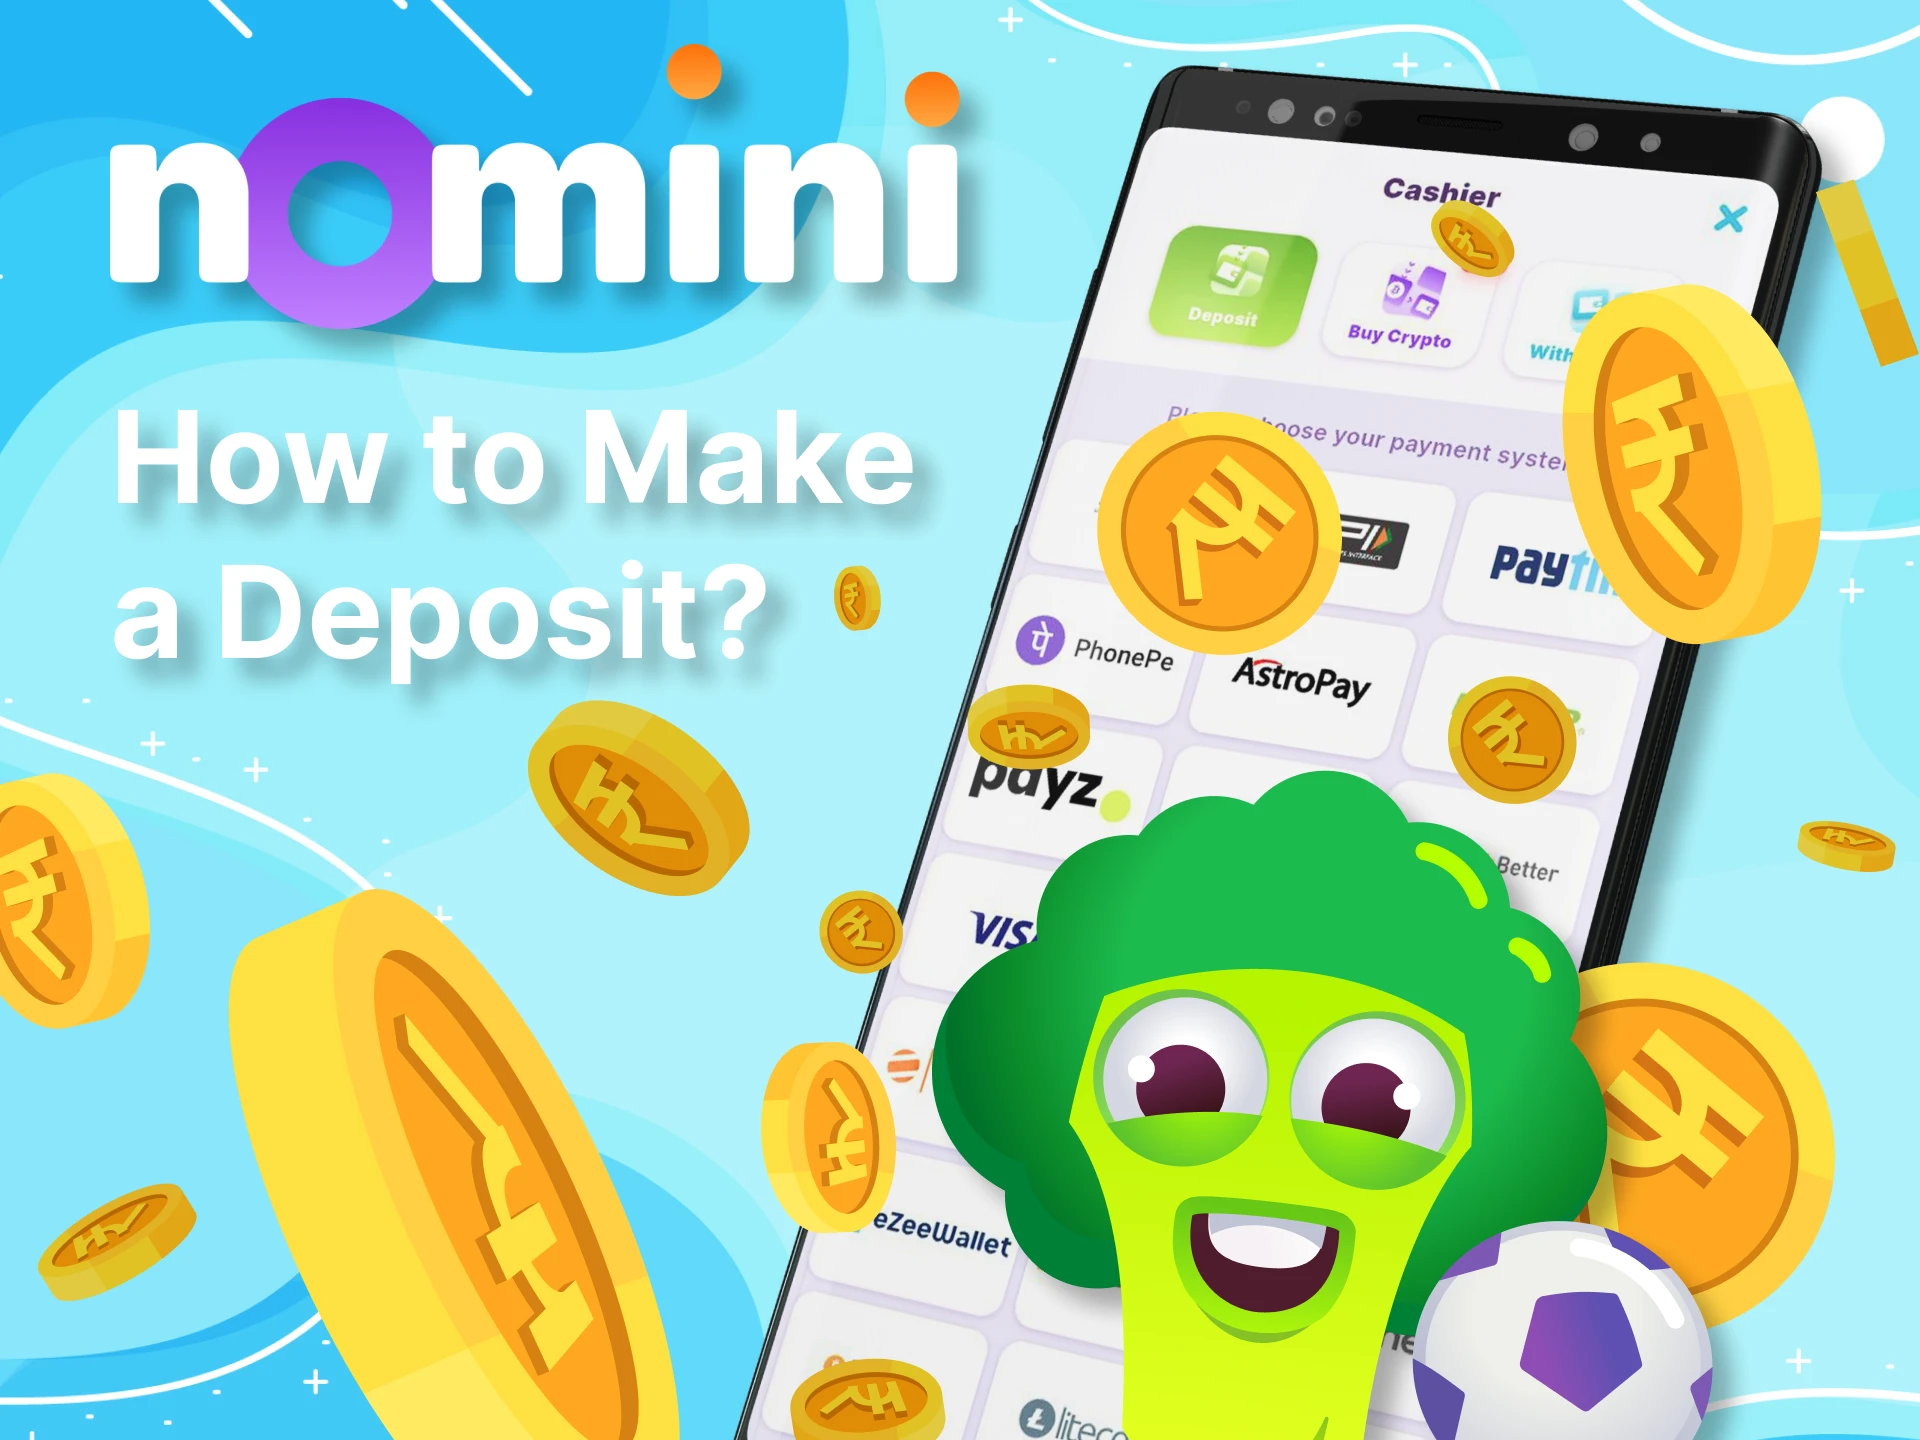 Follow the instructions to deposit your Nomini app account.